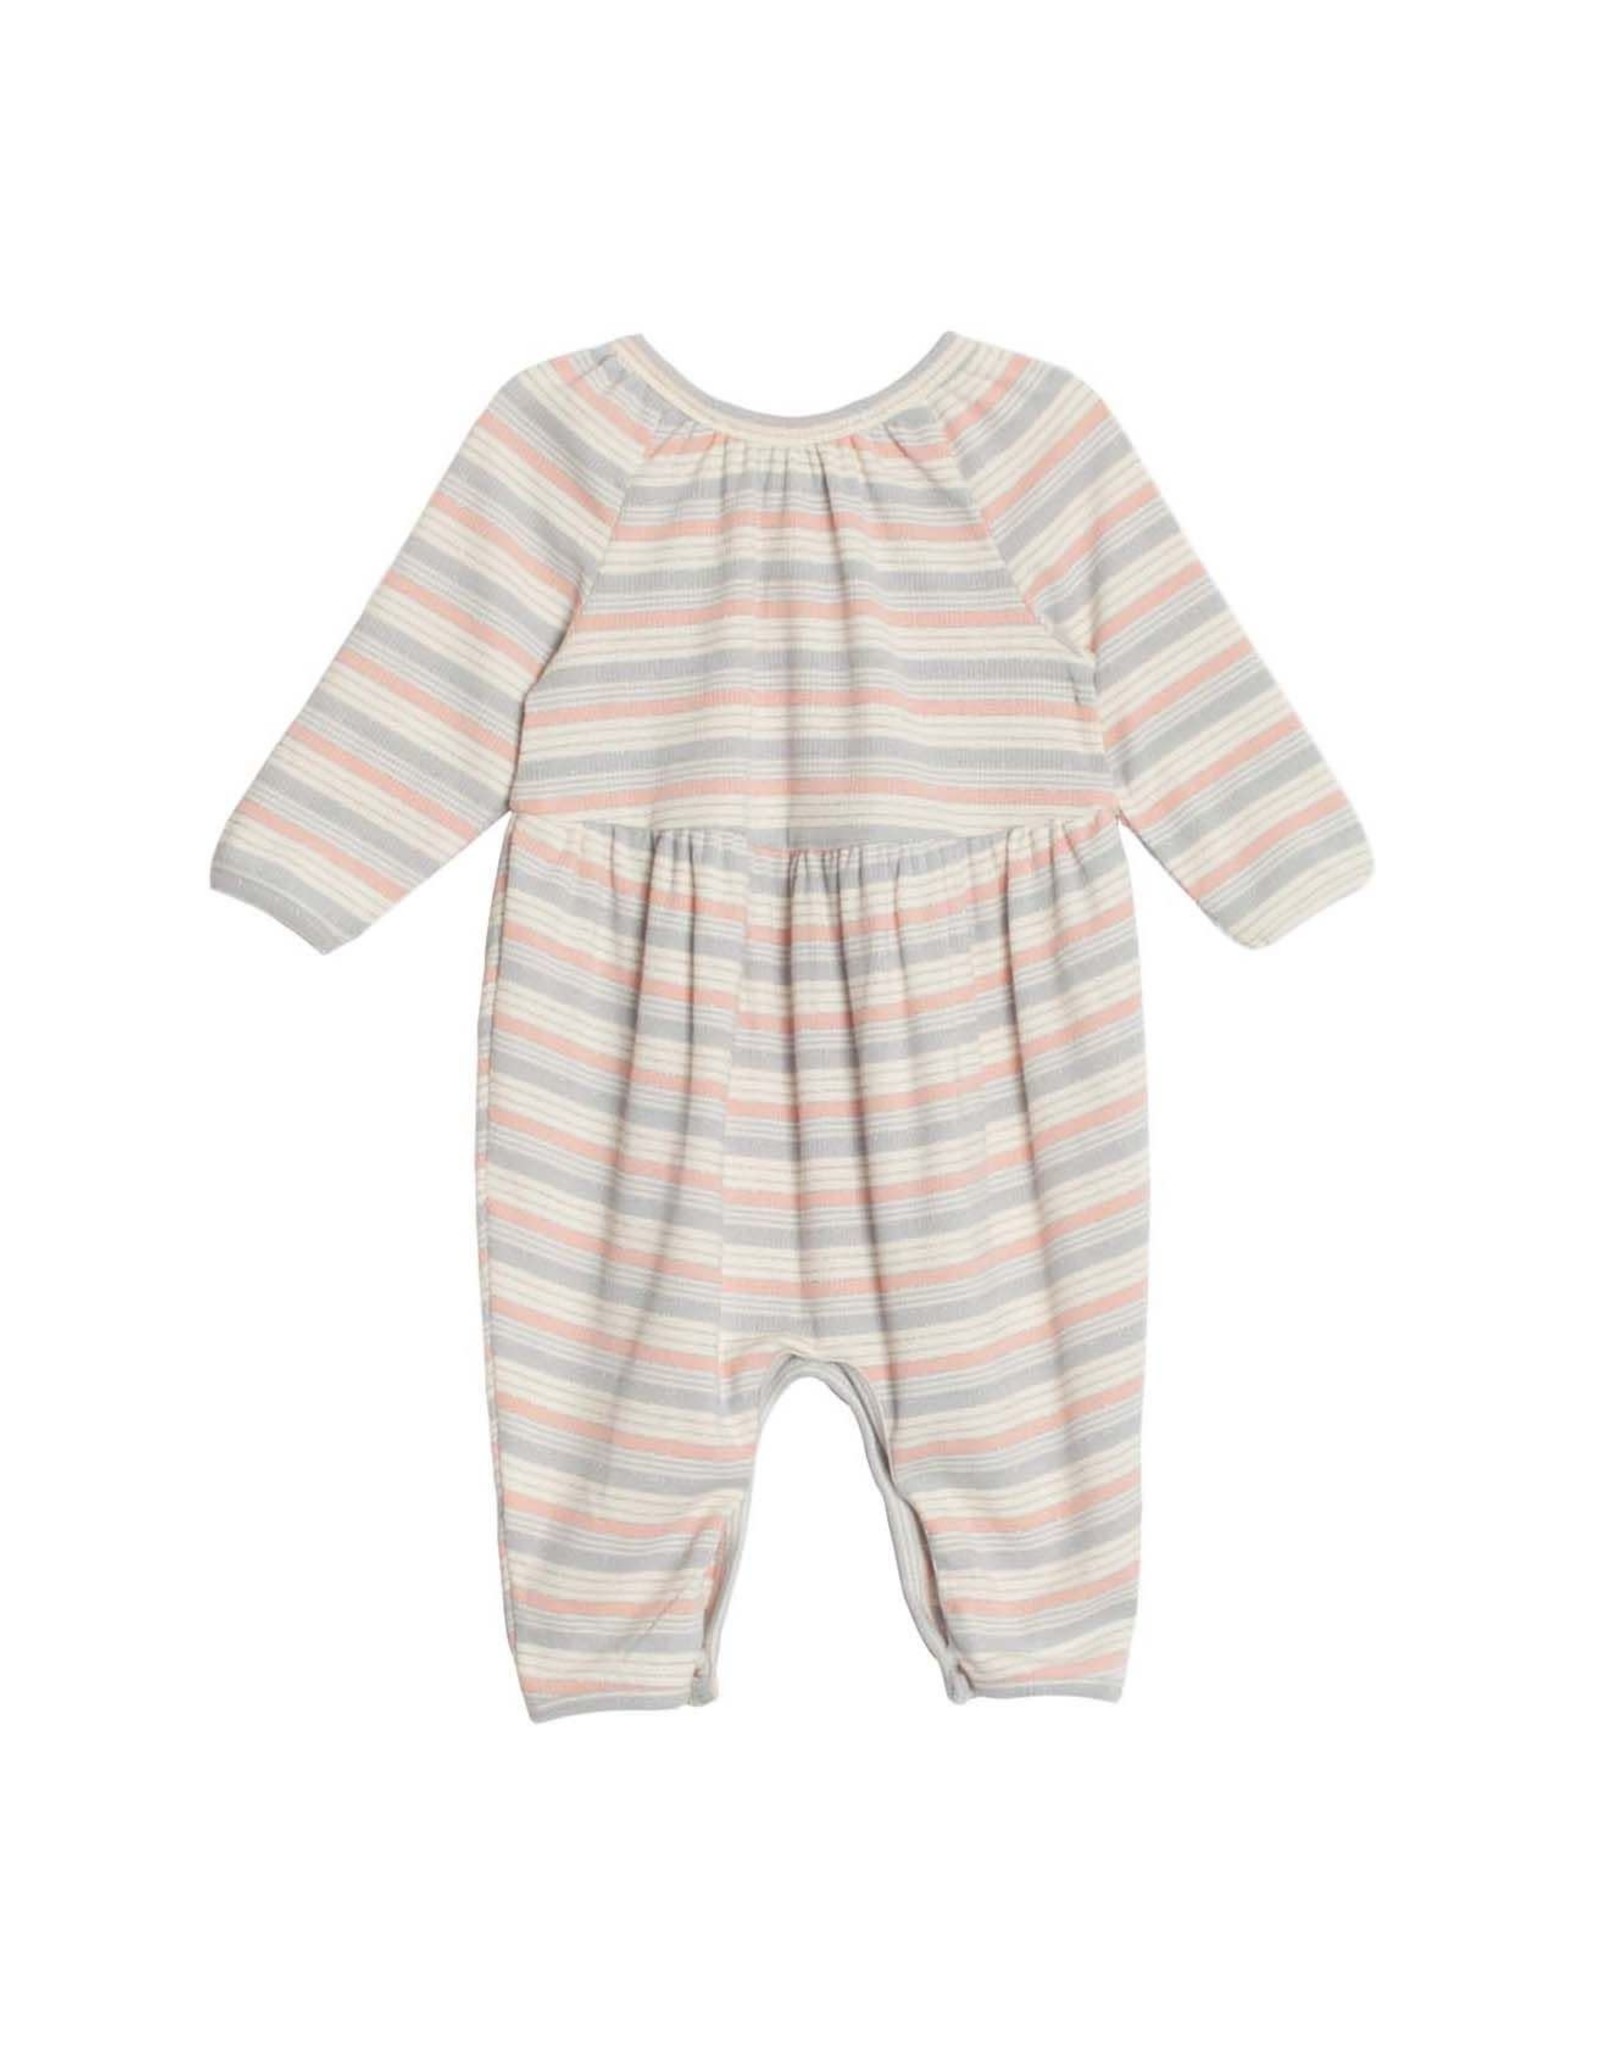 Mabel and Honey Avabelle Knit Romper